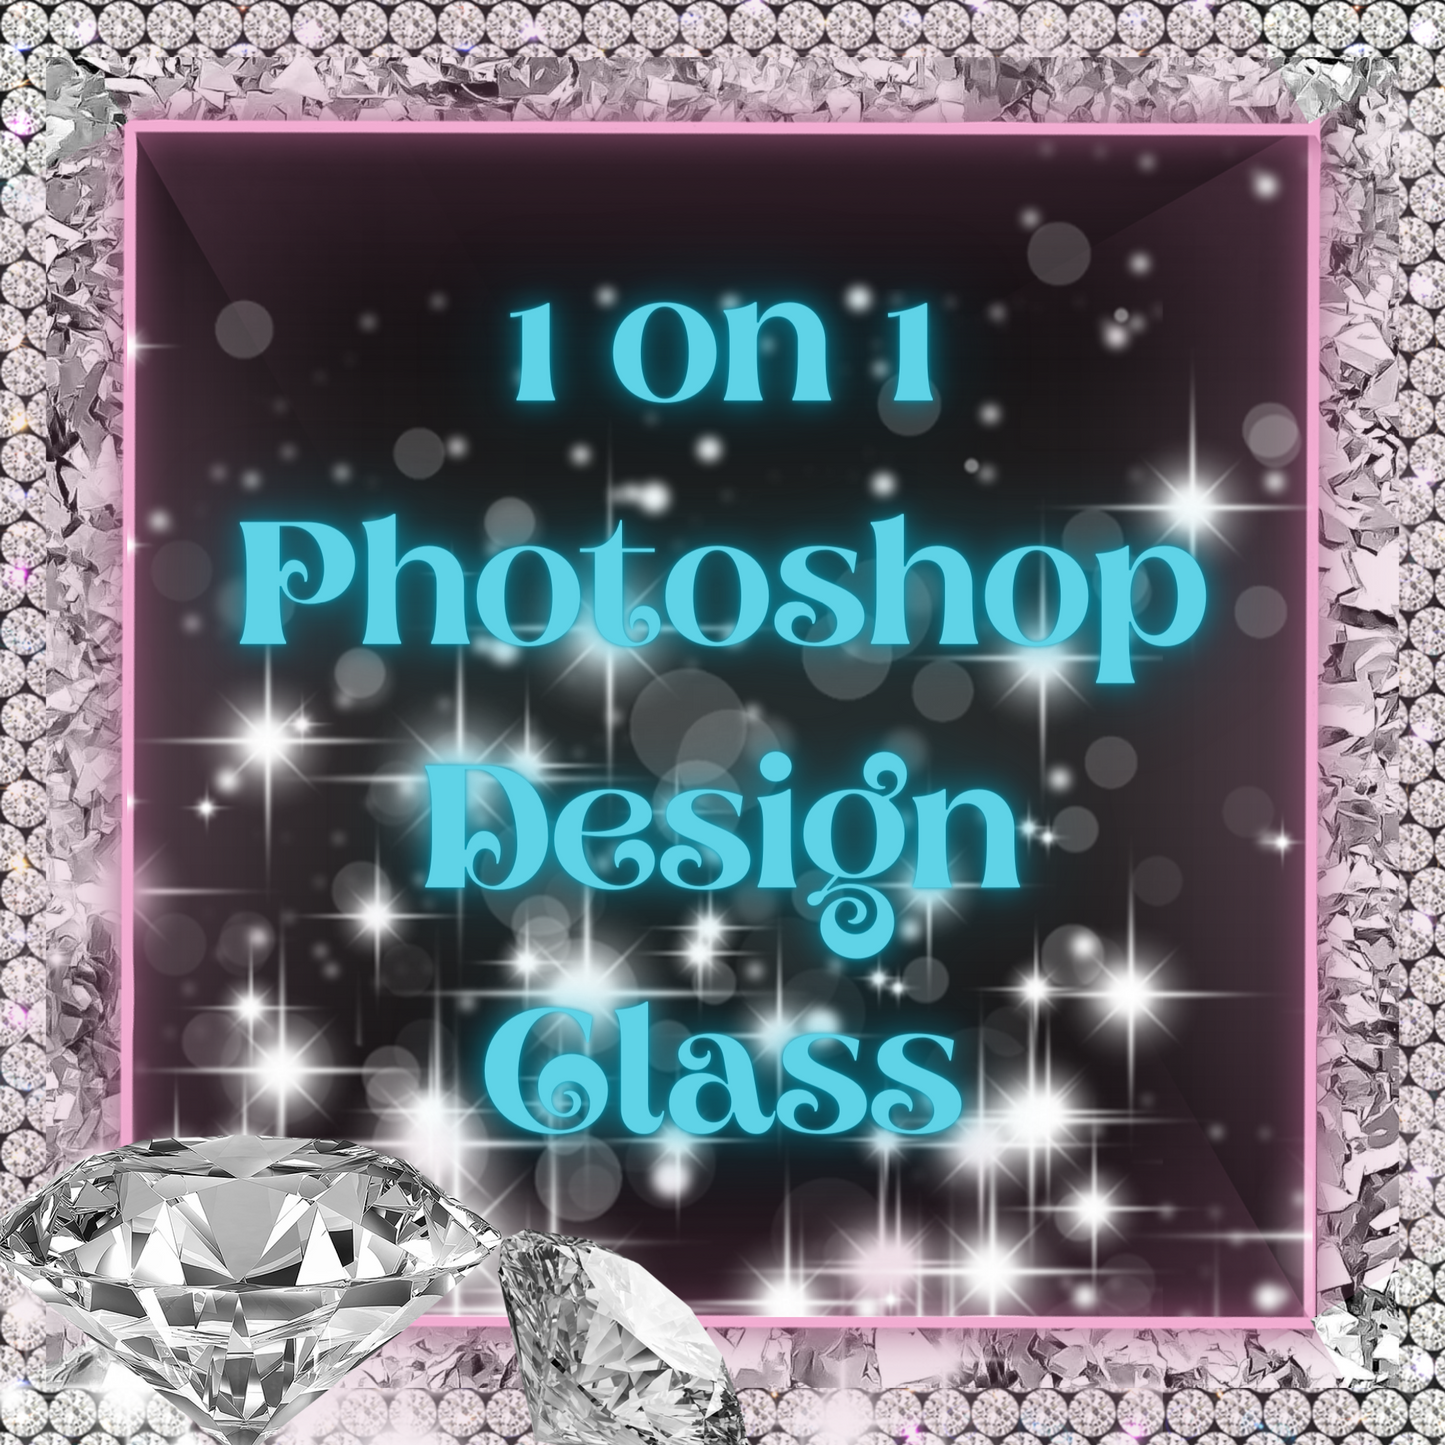 1 ON 1 Photoshop Design Class with TMJ